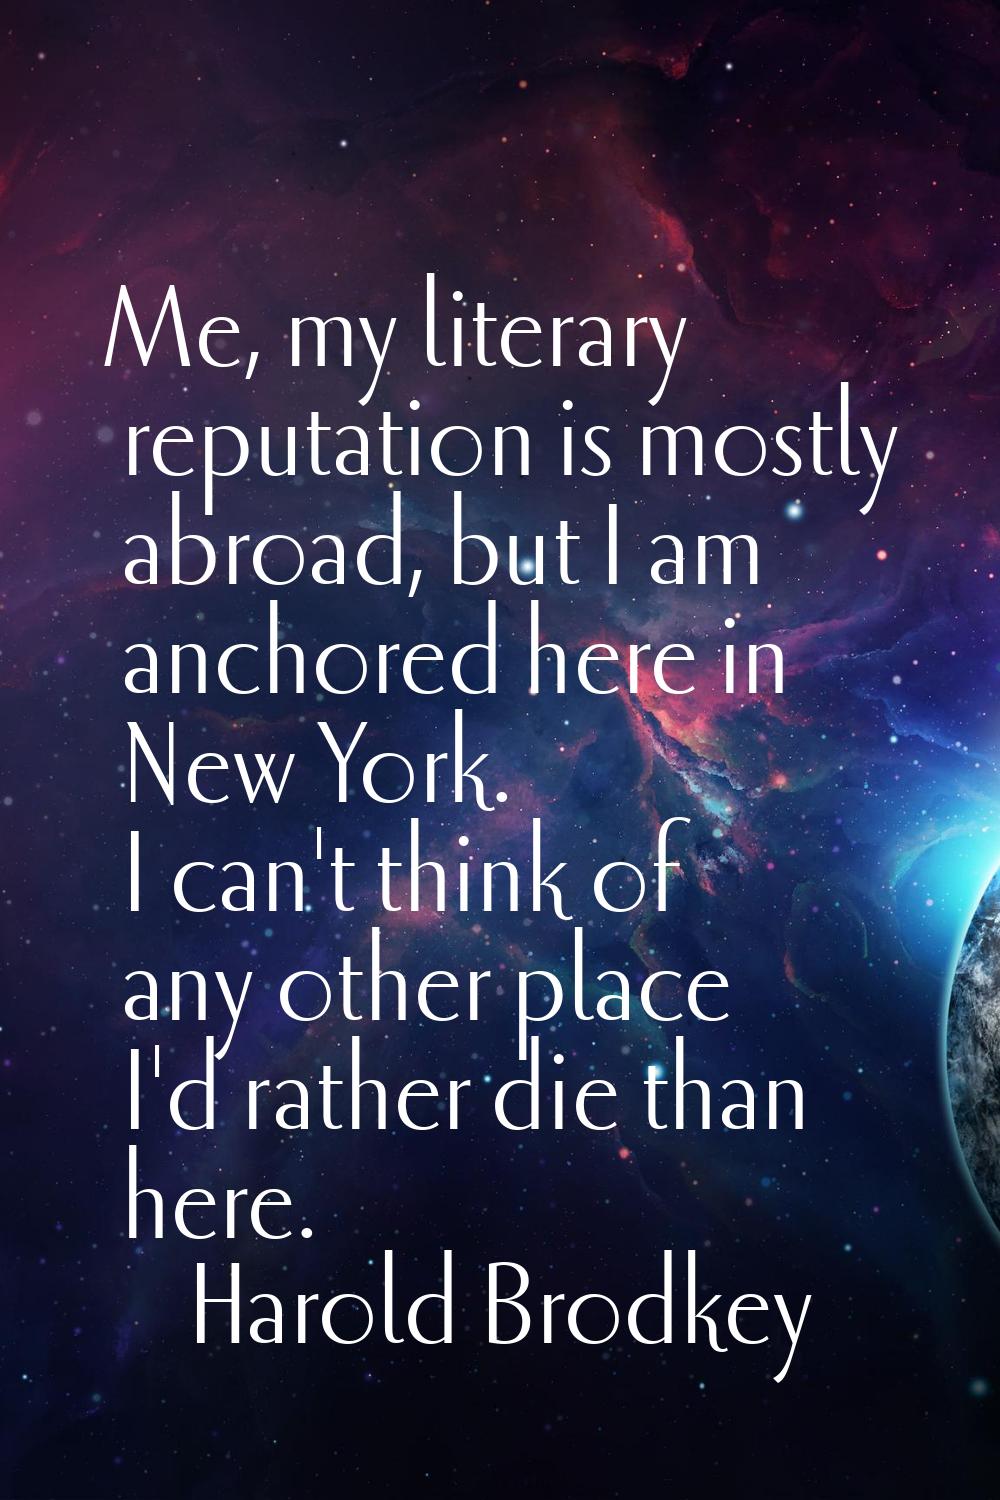 Me, my literary reputation is mostly abroad, but I am anchored here in New York. I can't think of a